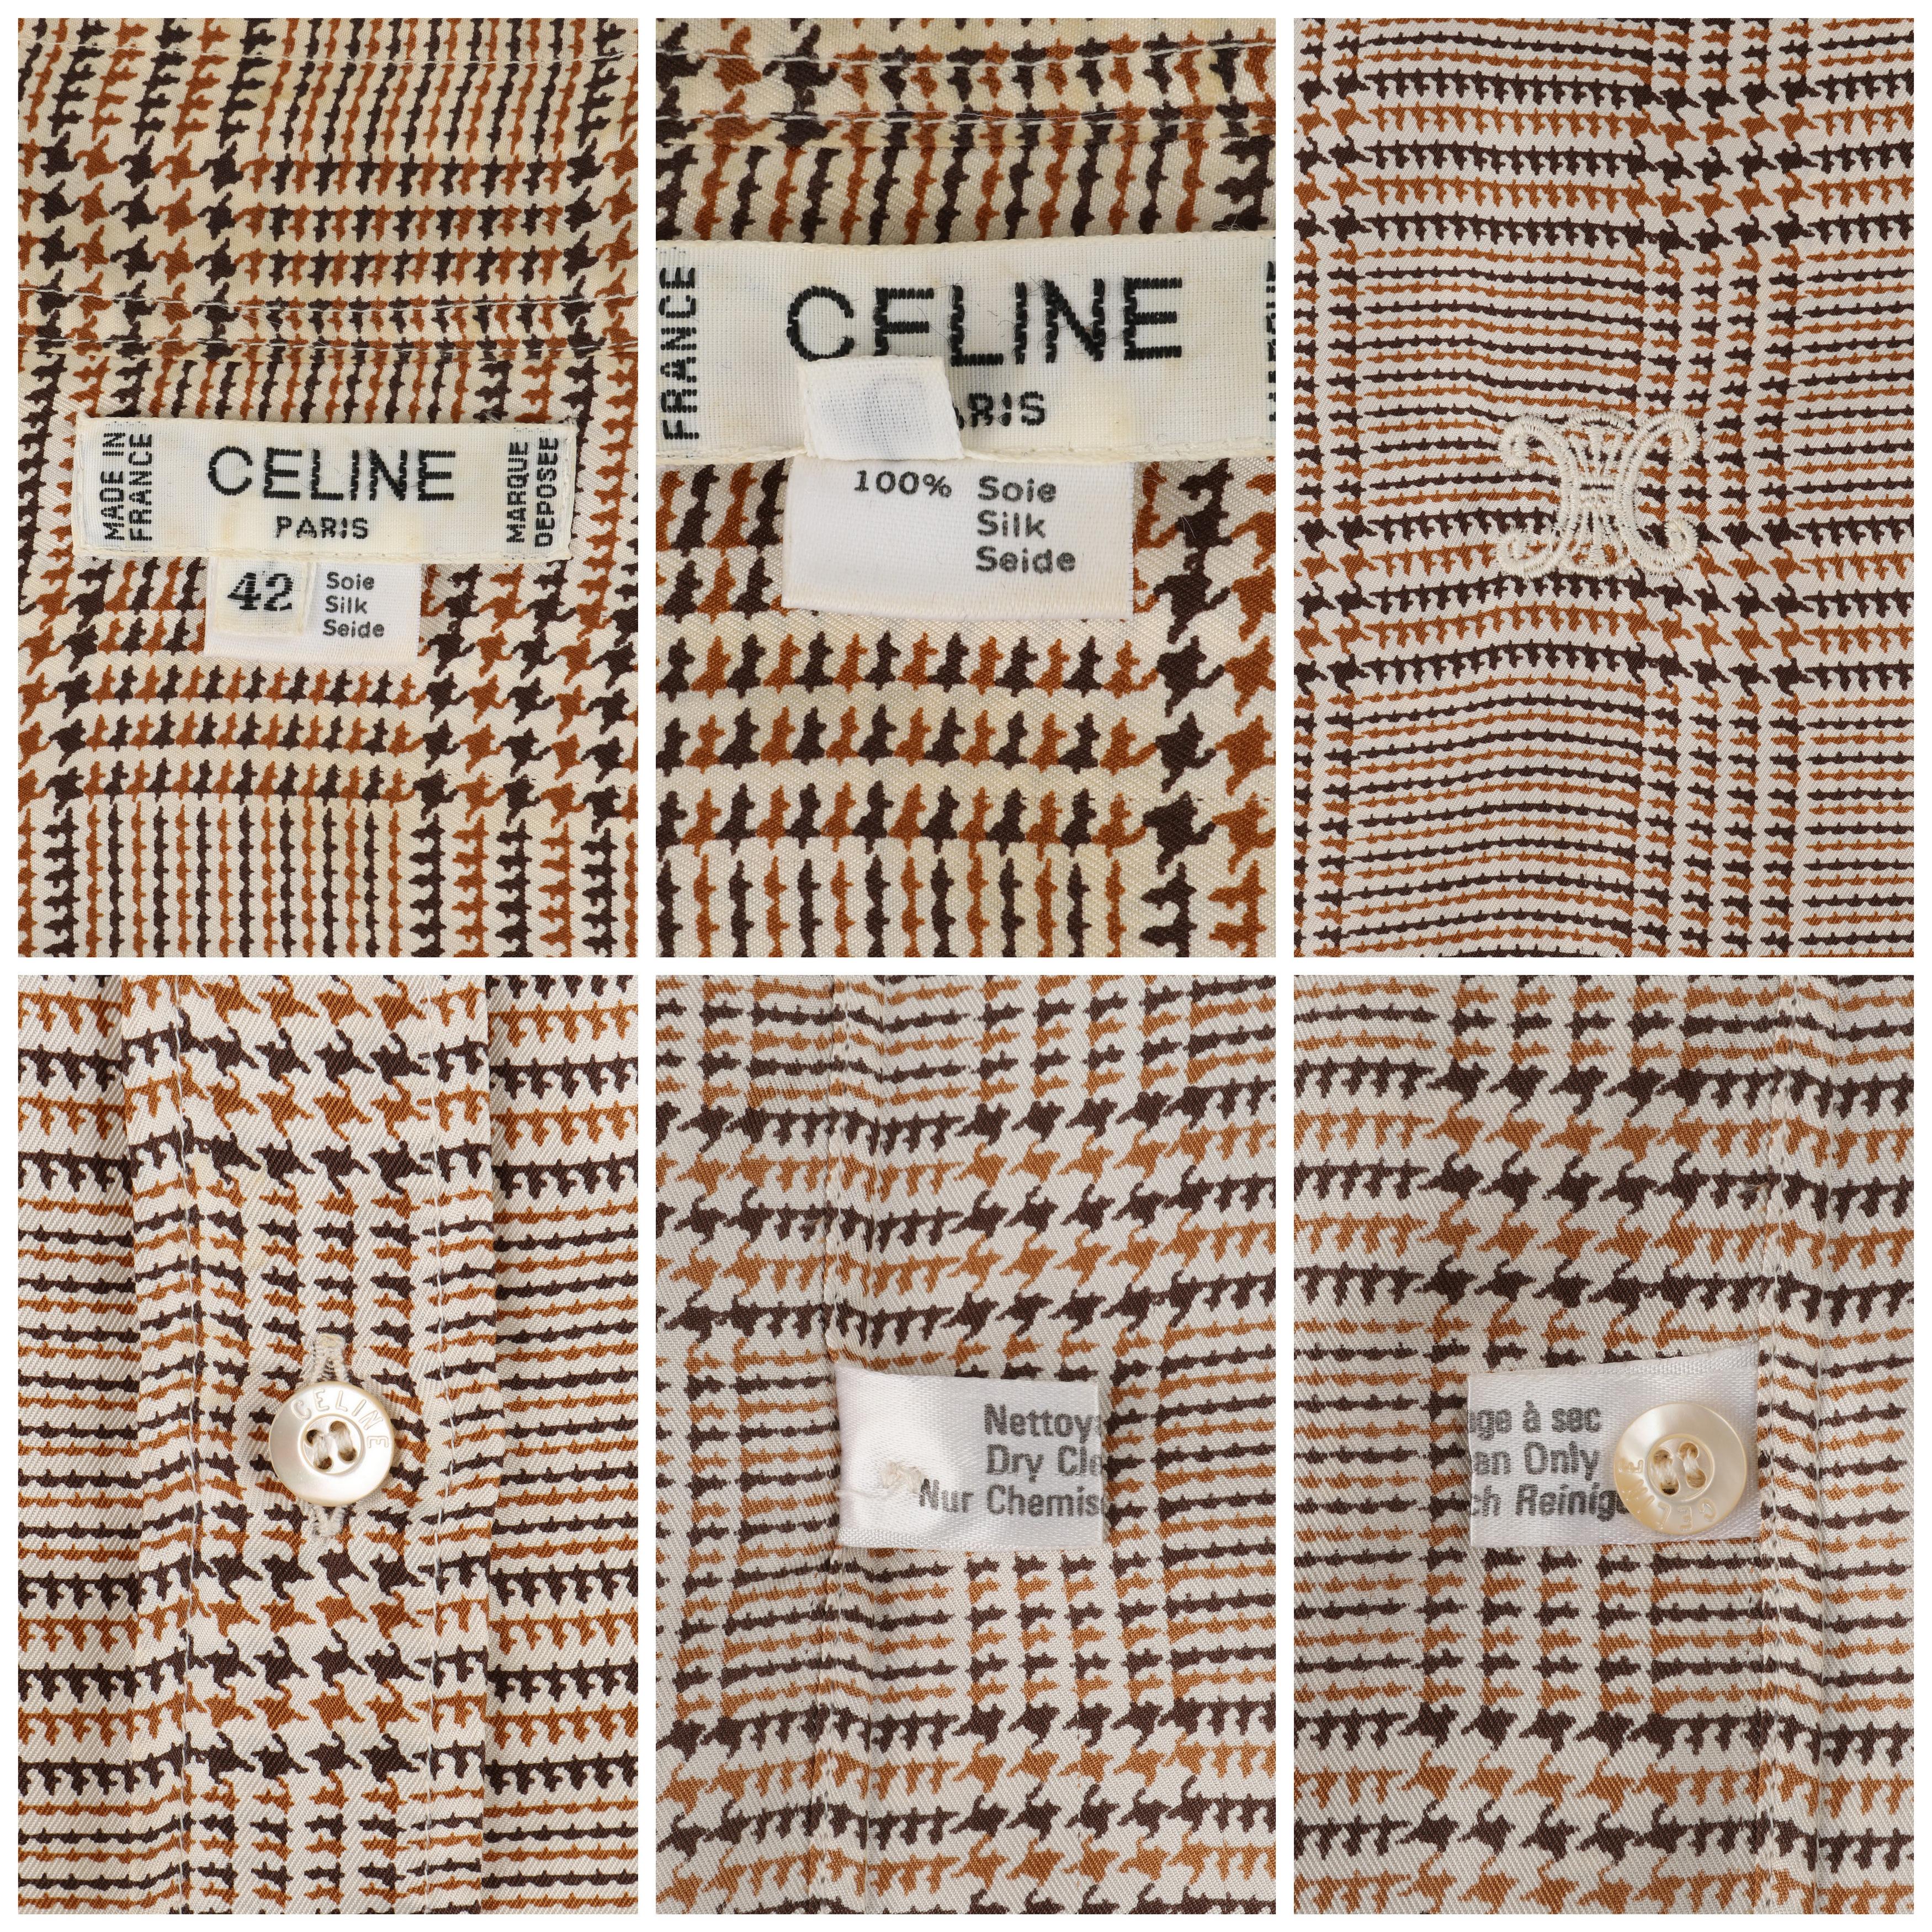 Celine c.1970 Brown Tan Silk Houndstooth Pussybow Button Up Blouse Top en vente 6